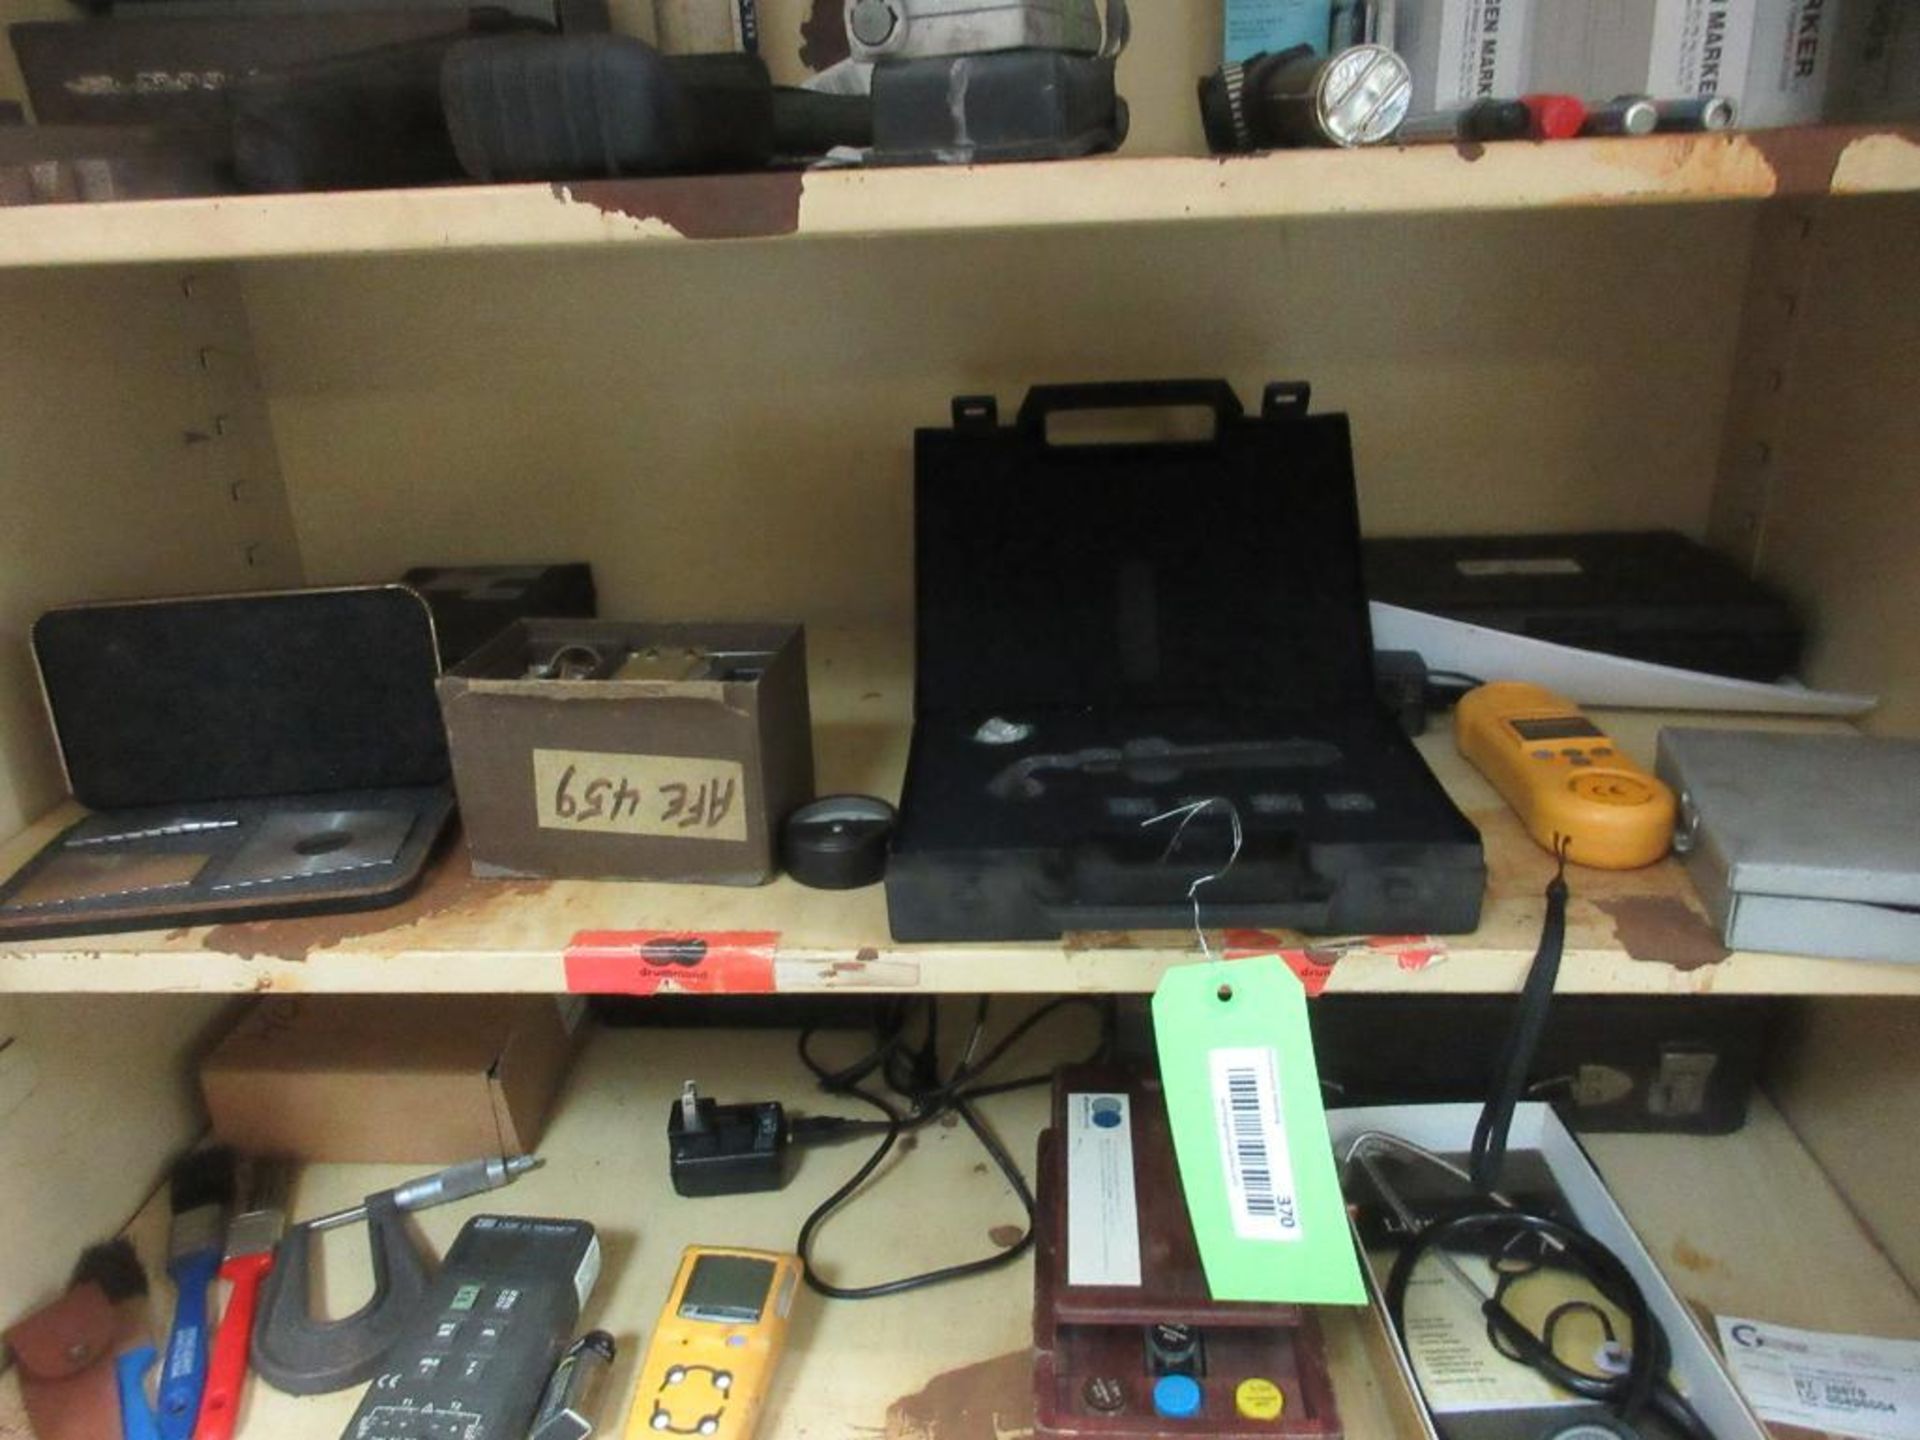 CONTENTS OF 3 CABINETS IN WORK AREA, TEST AND MEASUREMENT EQUIPMENT, METERS, TOOLS, ETC (OFFICES) - Image 12 of 18